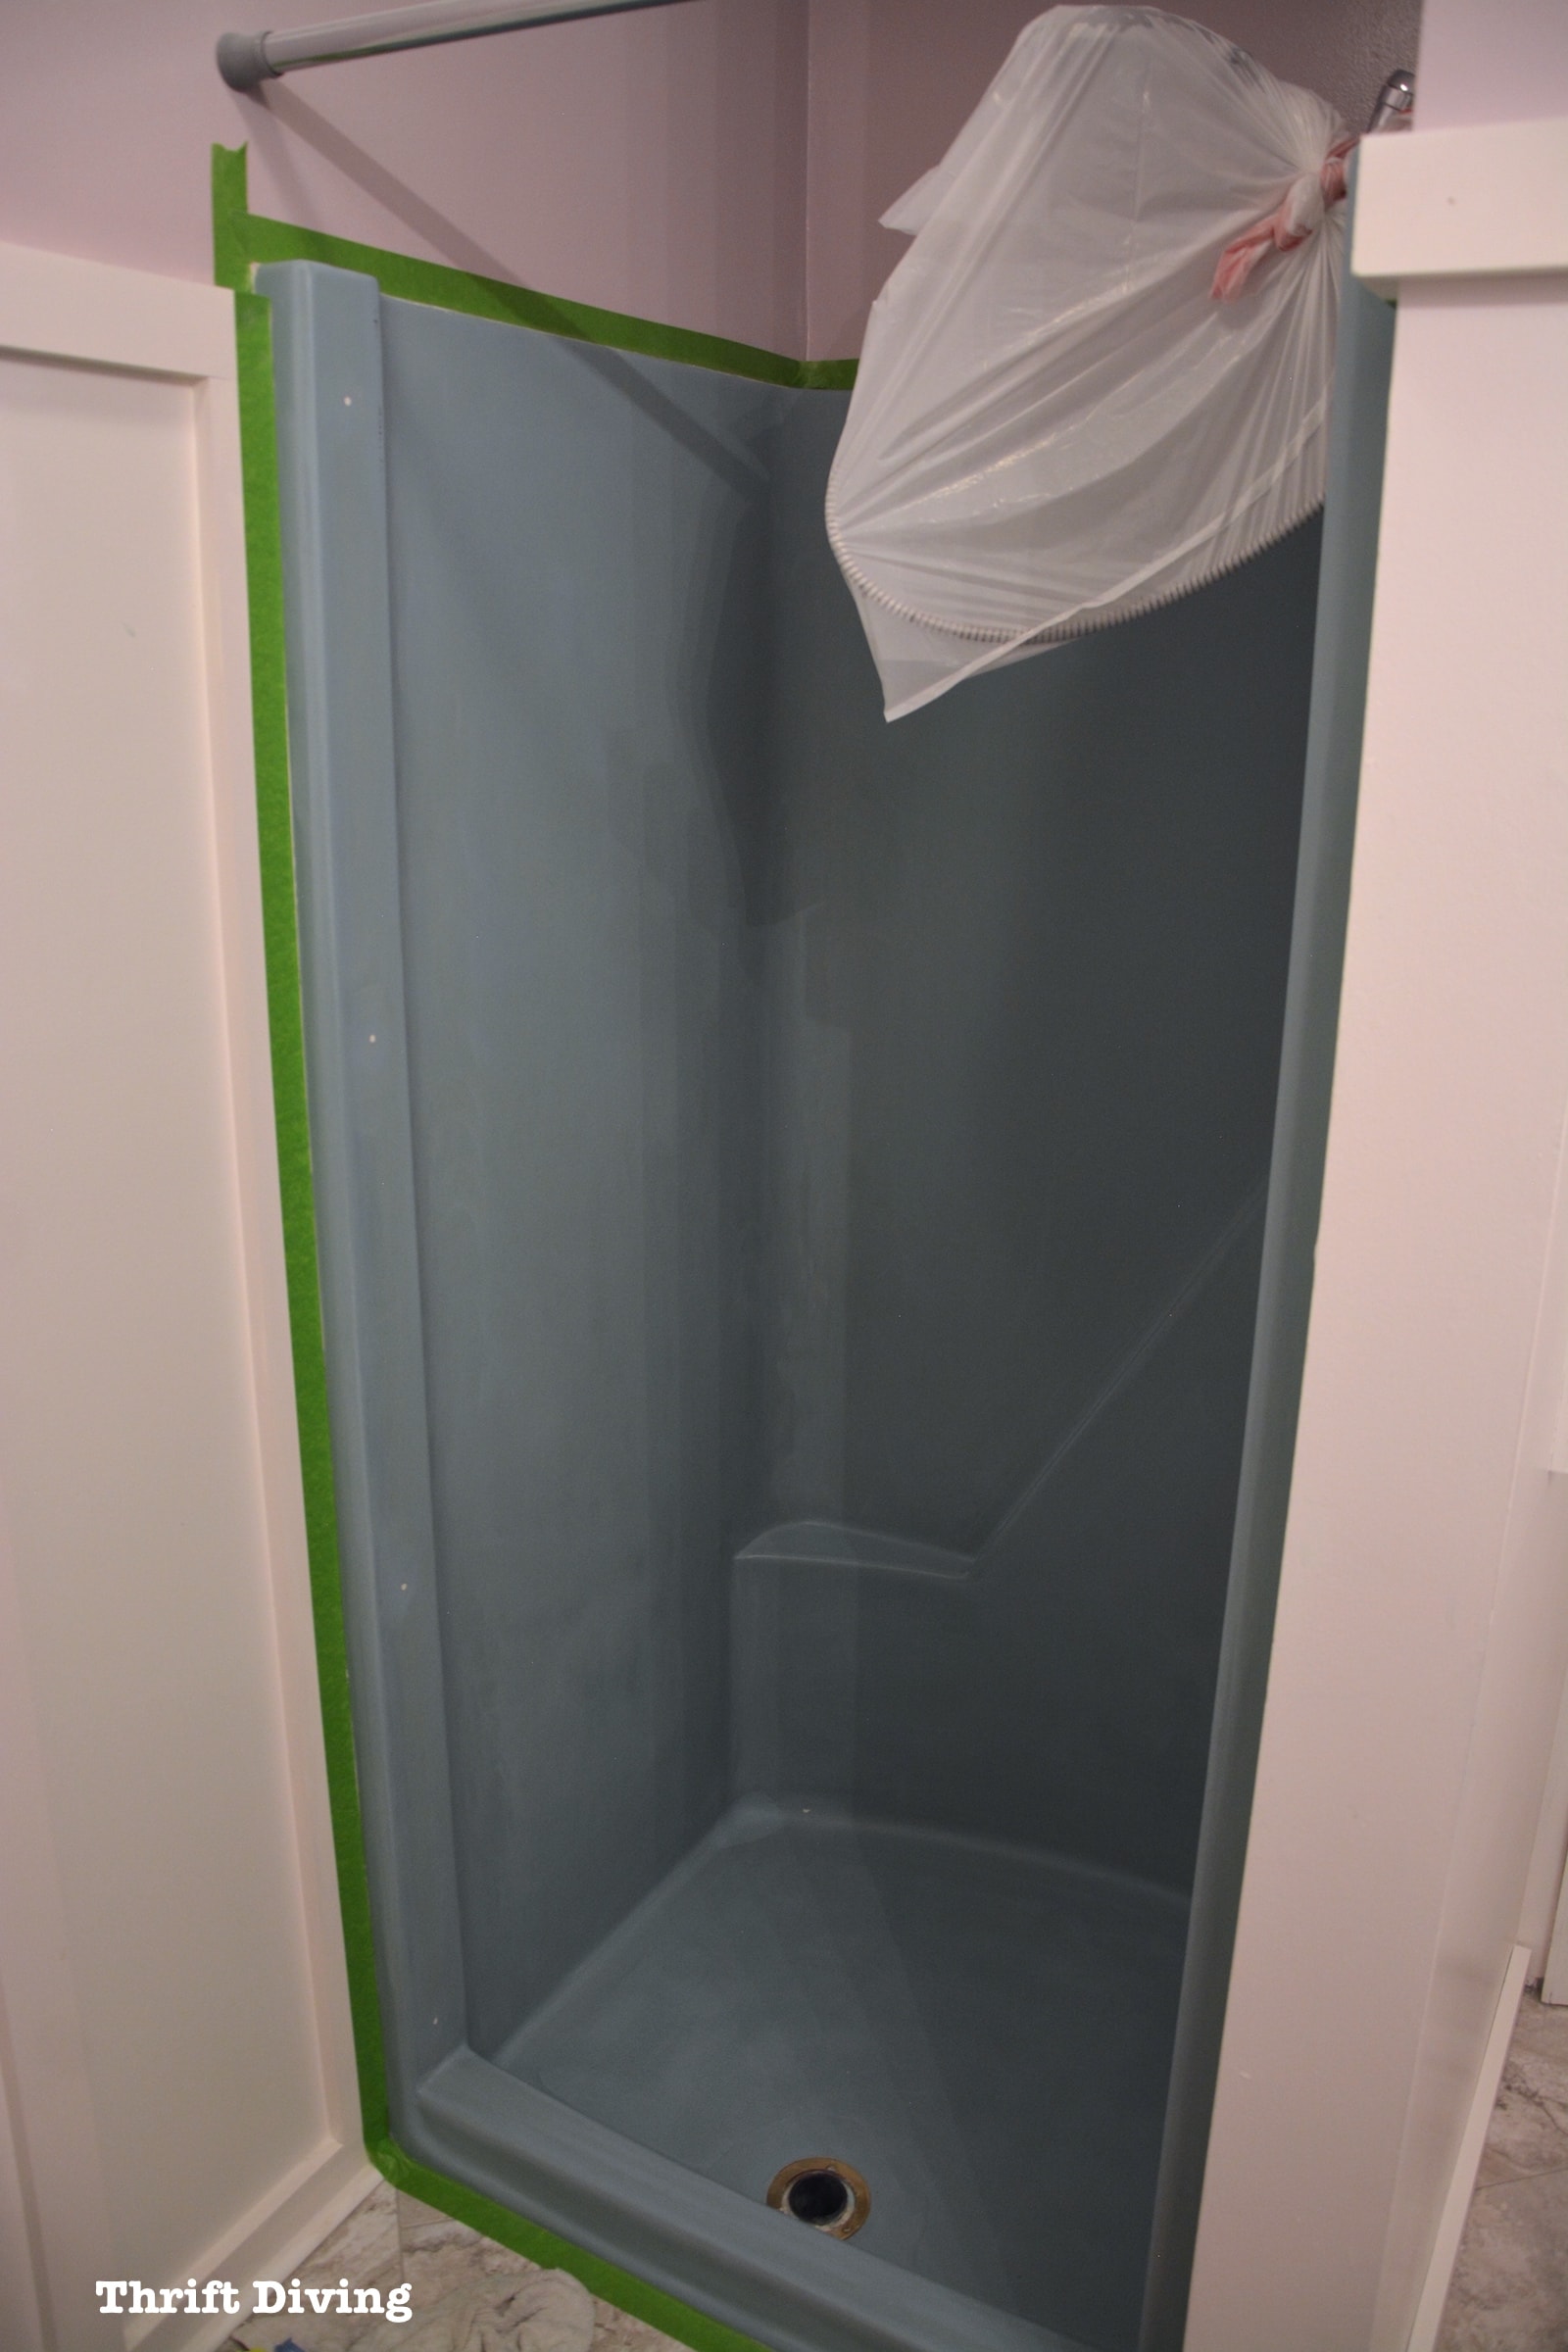 Shower-and-tub-refinishing-how-to-paint-a-shower-tub - Thrift Diving Blog - 8855